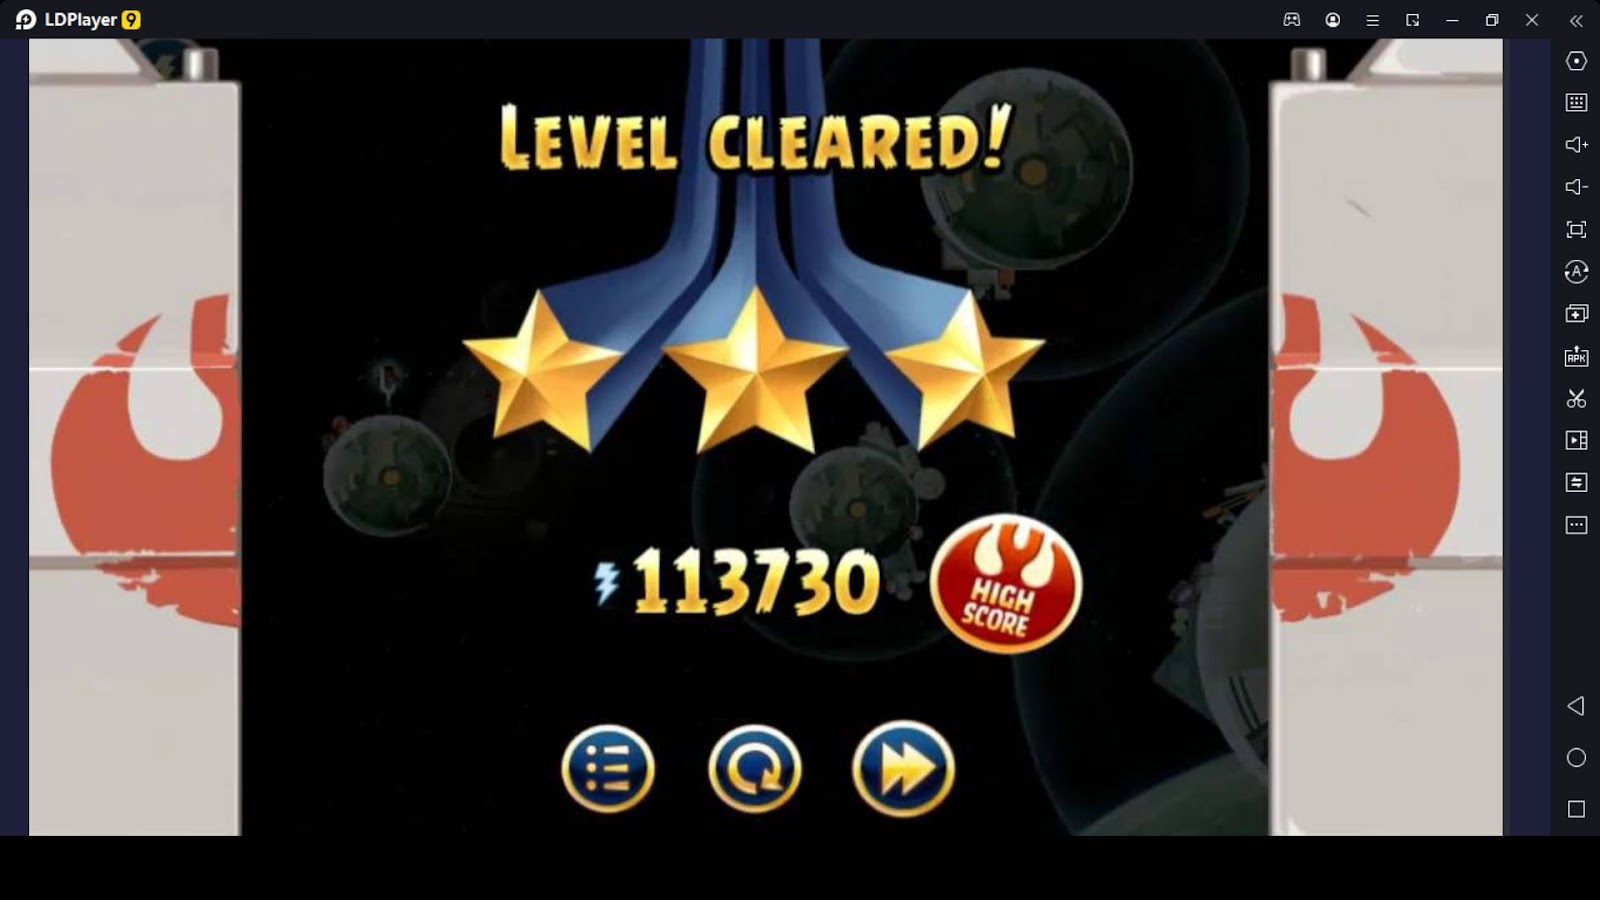 Clear Levels with Three Stars